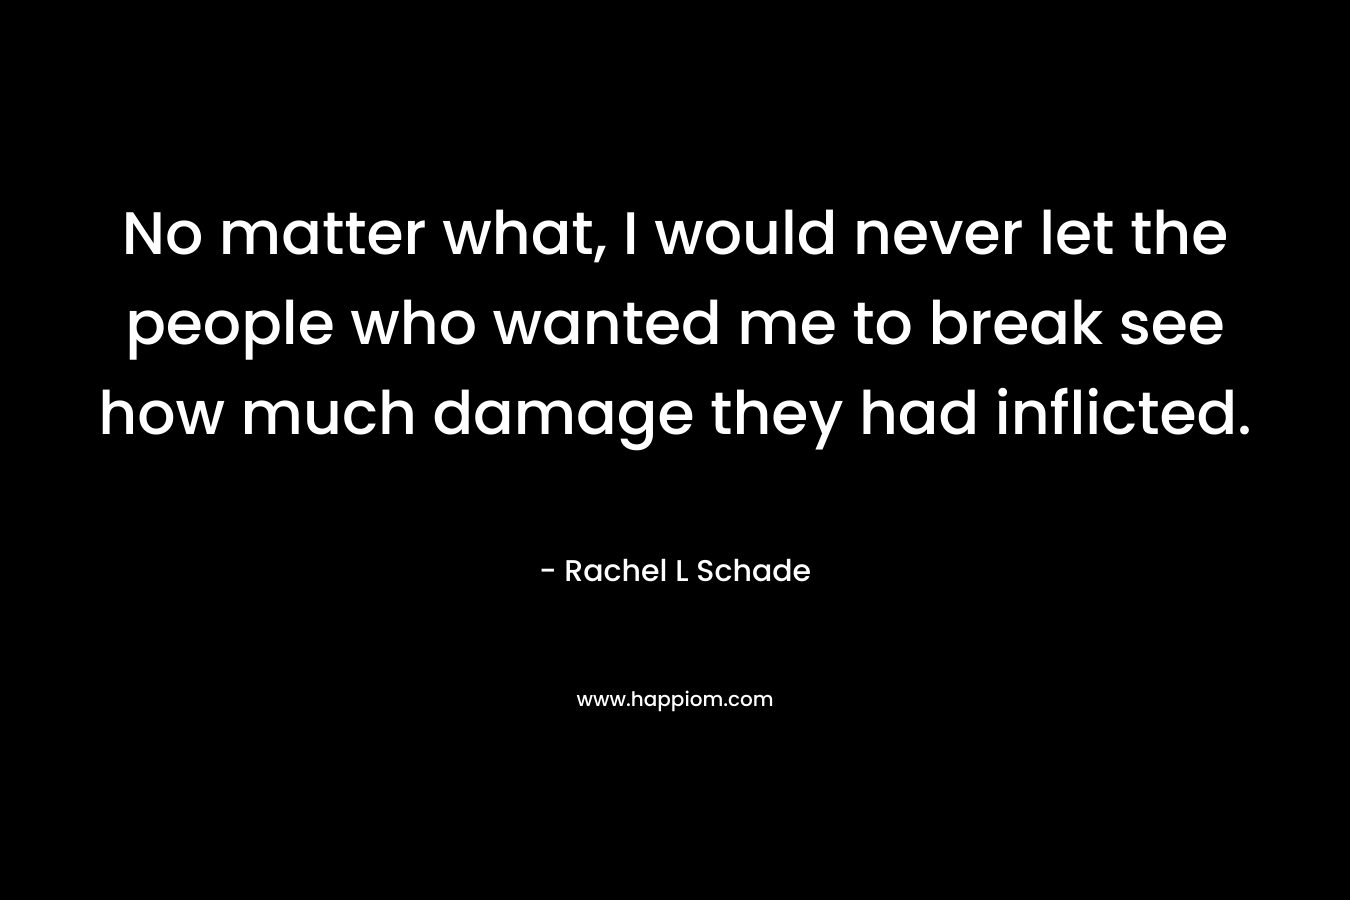 No matter what, I would never let the people who wanted me to break see how much damage they had inflicted. – Rachel L Schade